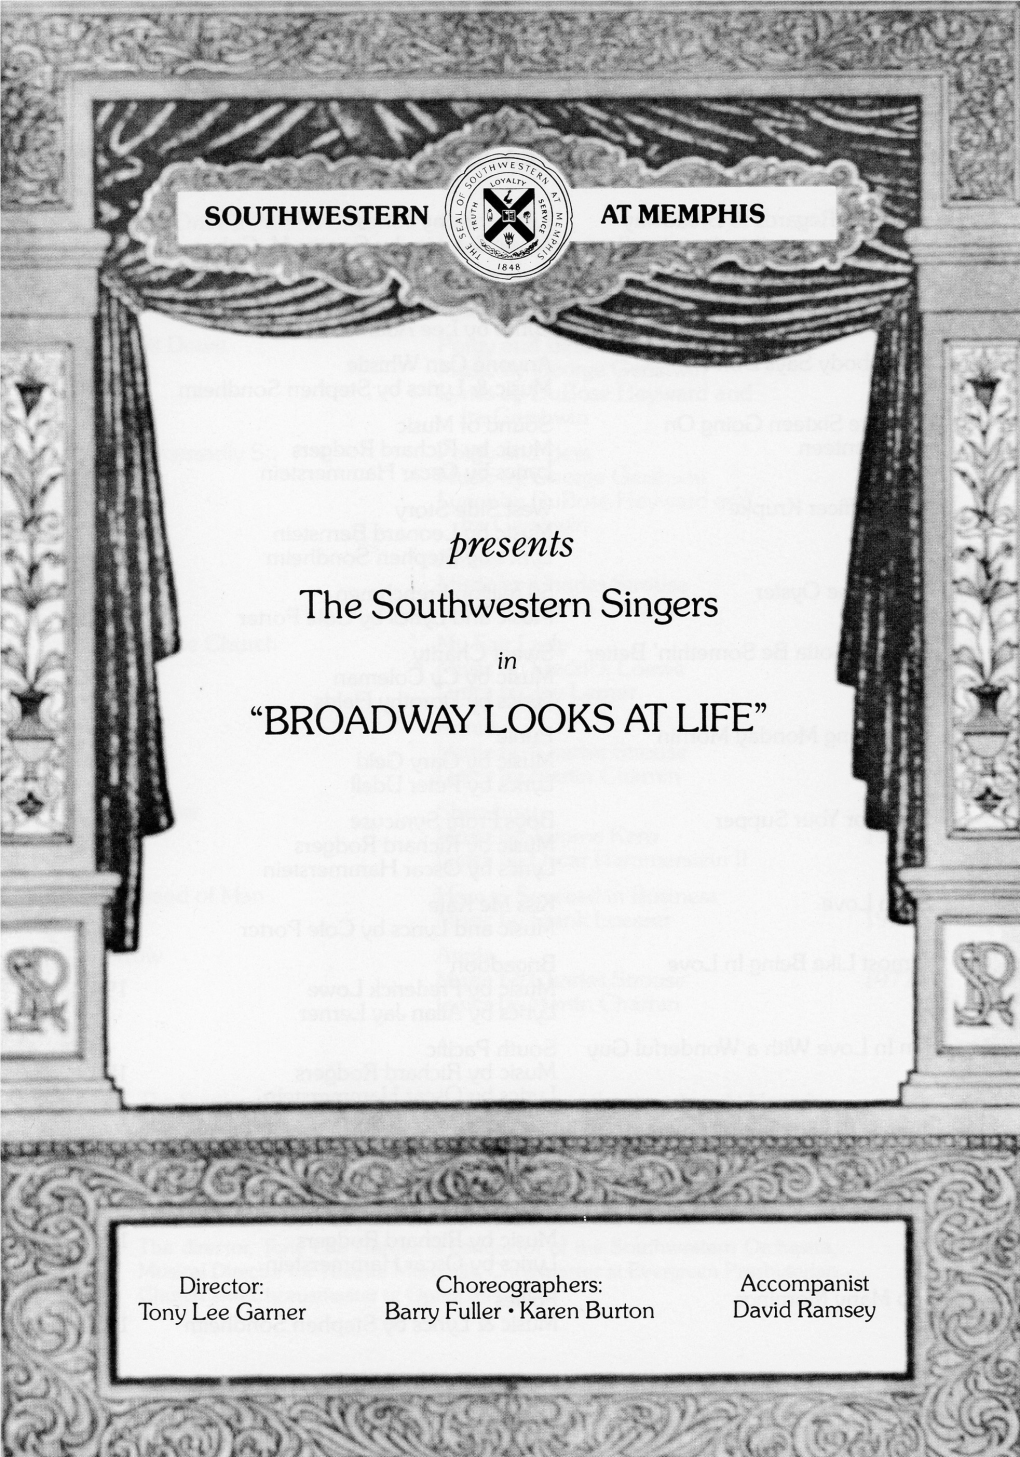 The Southwestern Singers "BROADWAY LOOKS at LIFE"